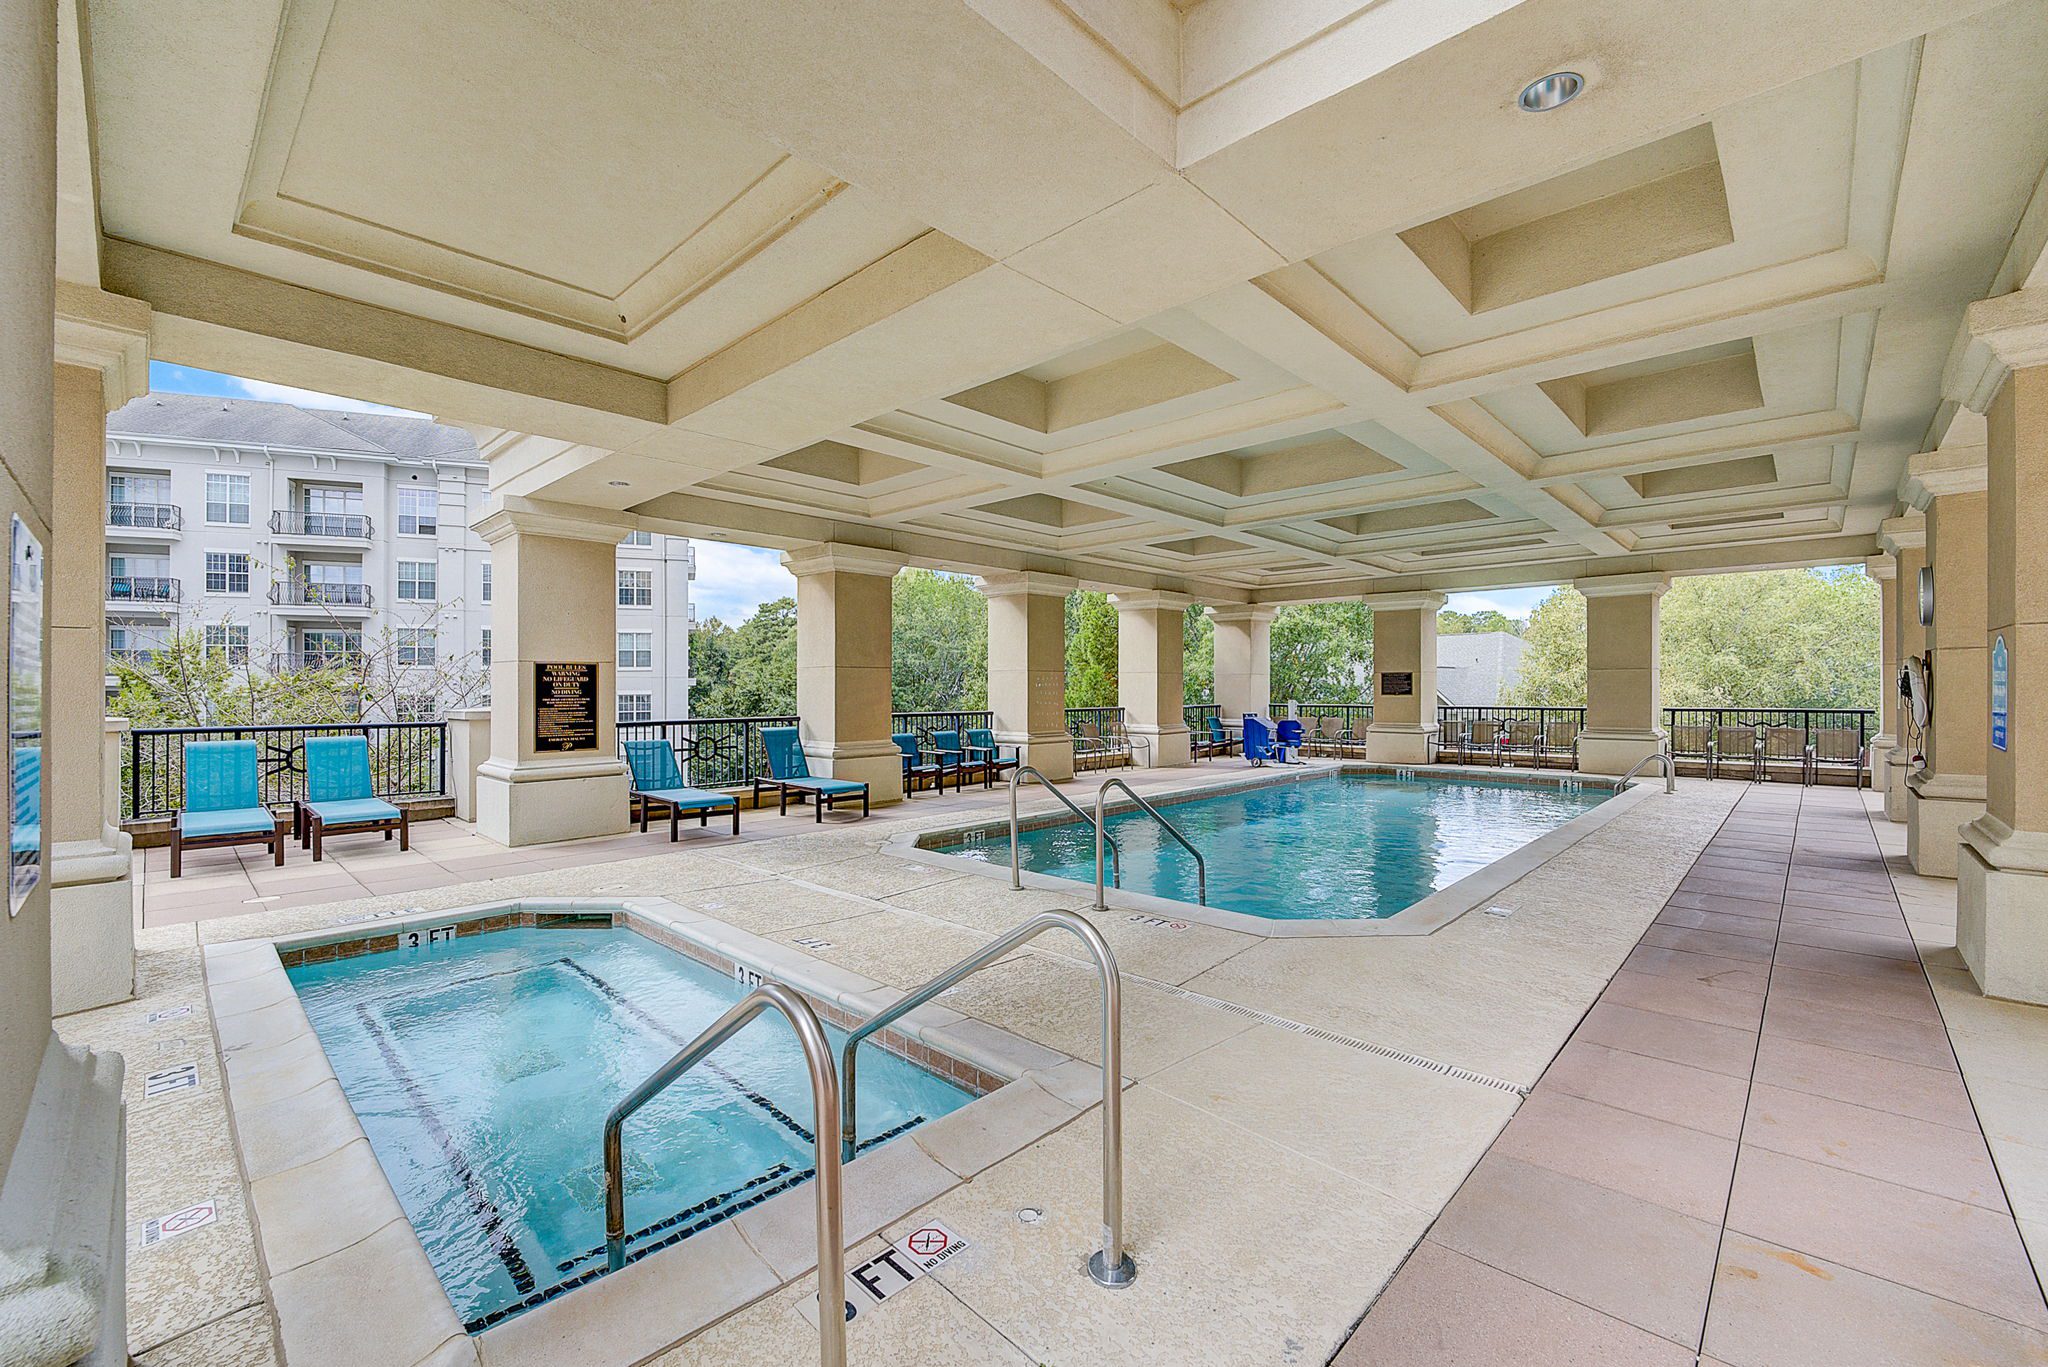 Scenic pool at buckhead at Piedmont, offering a refreshing oasis for relaxation and recreation.